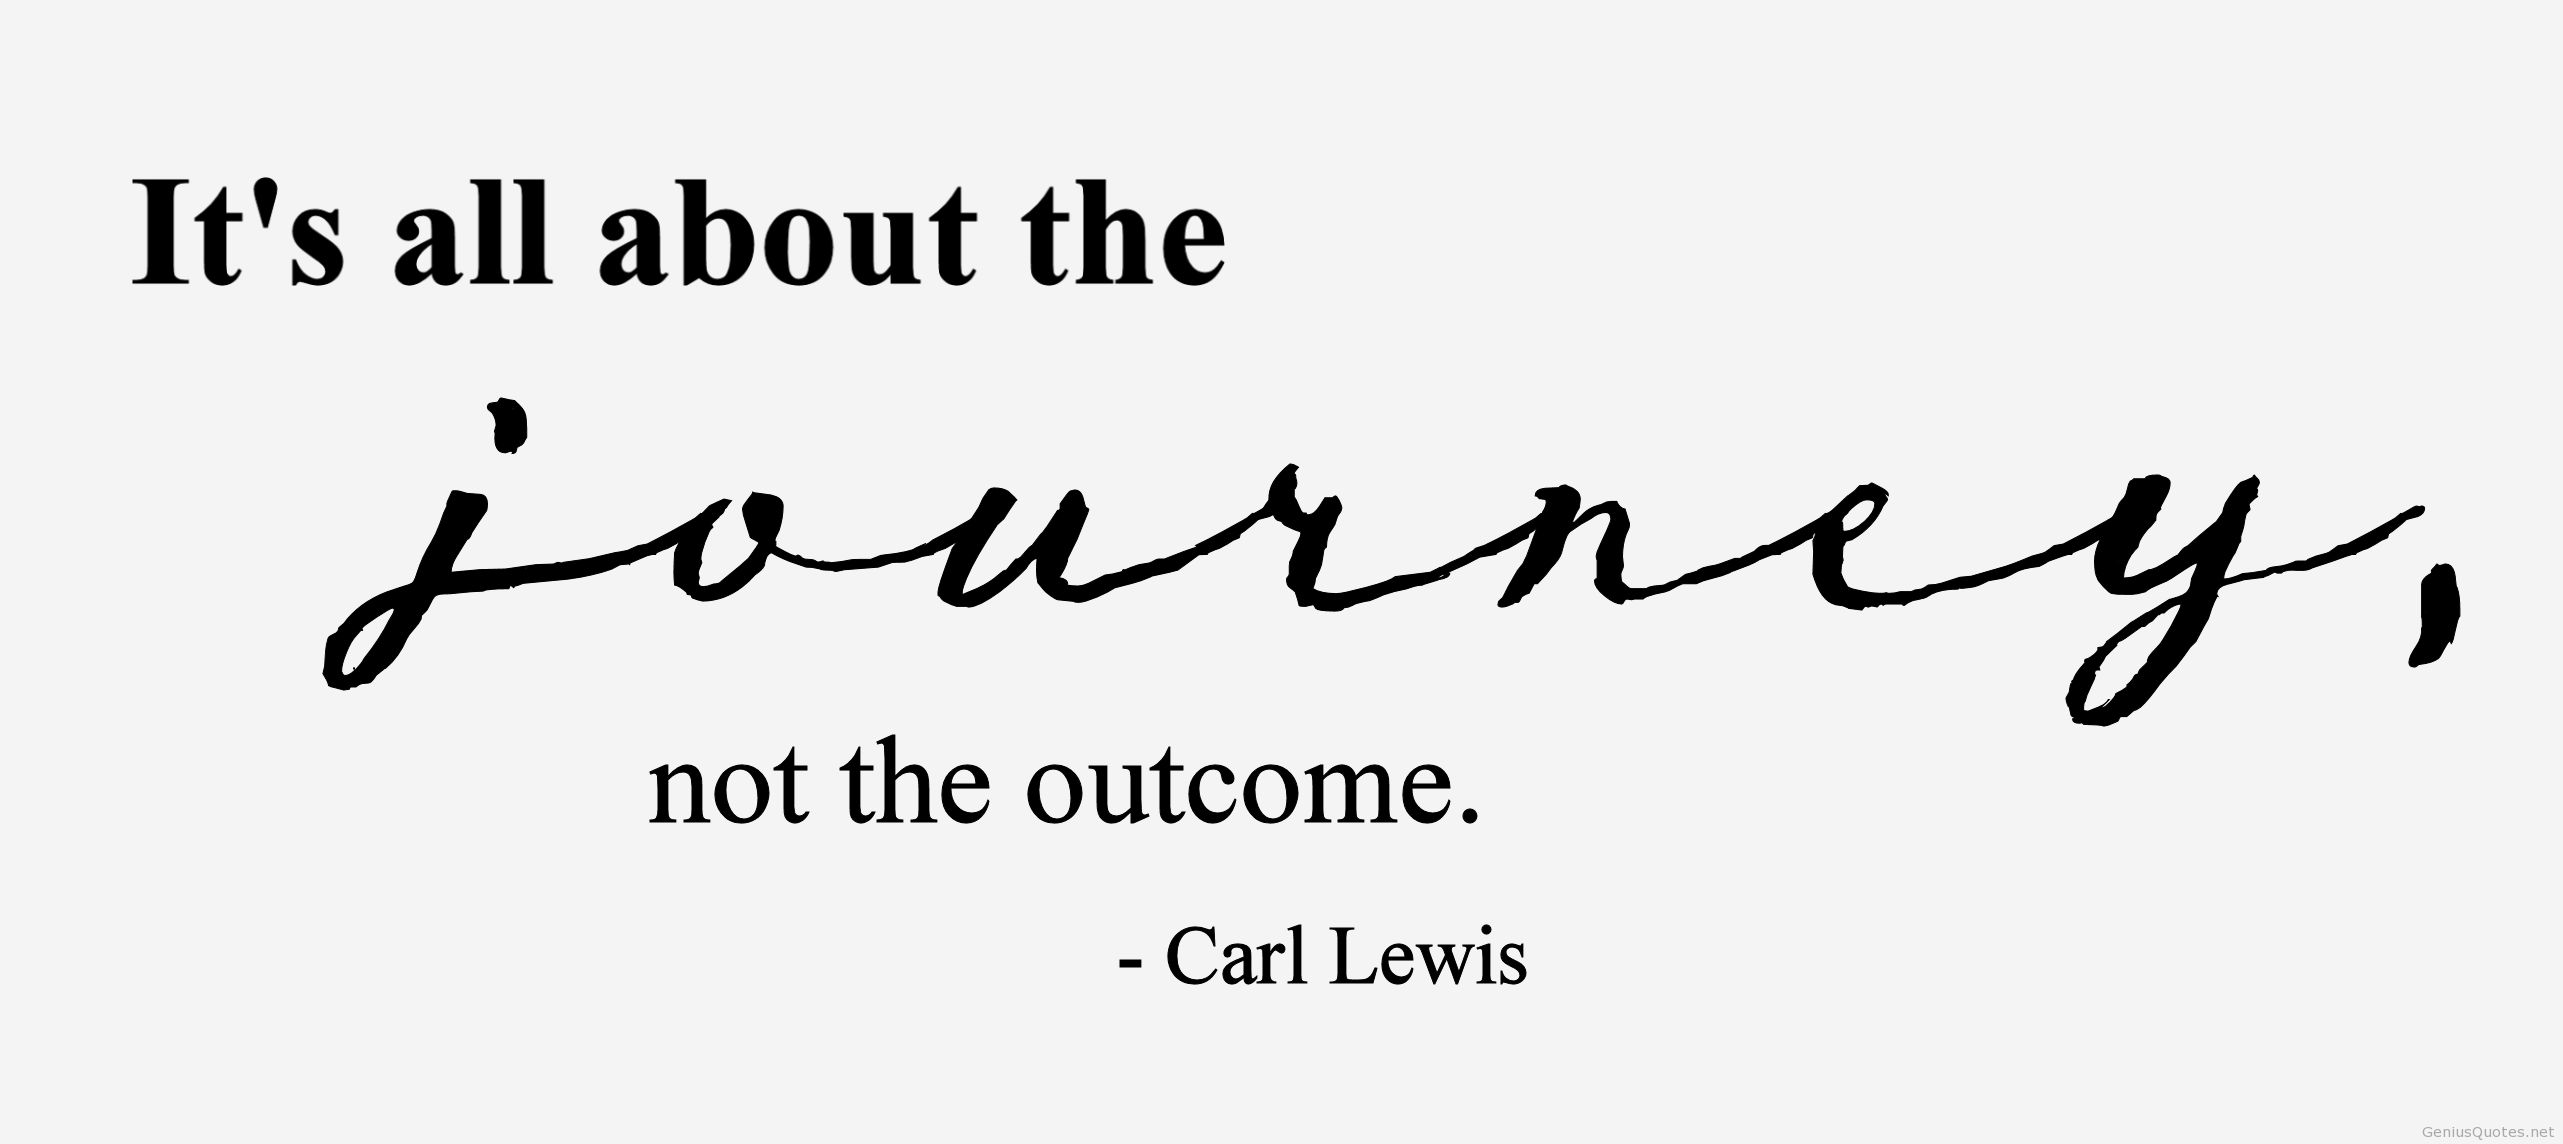 It's all about the journey not the outcome. Carl Lewis